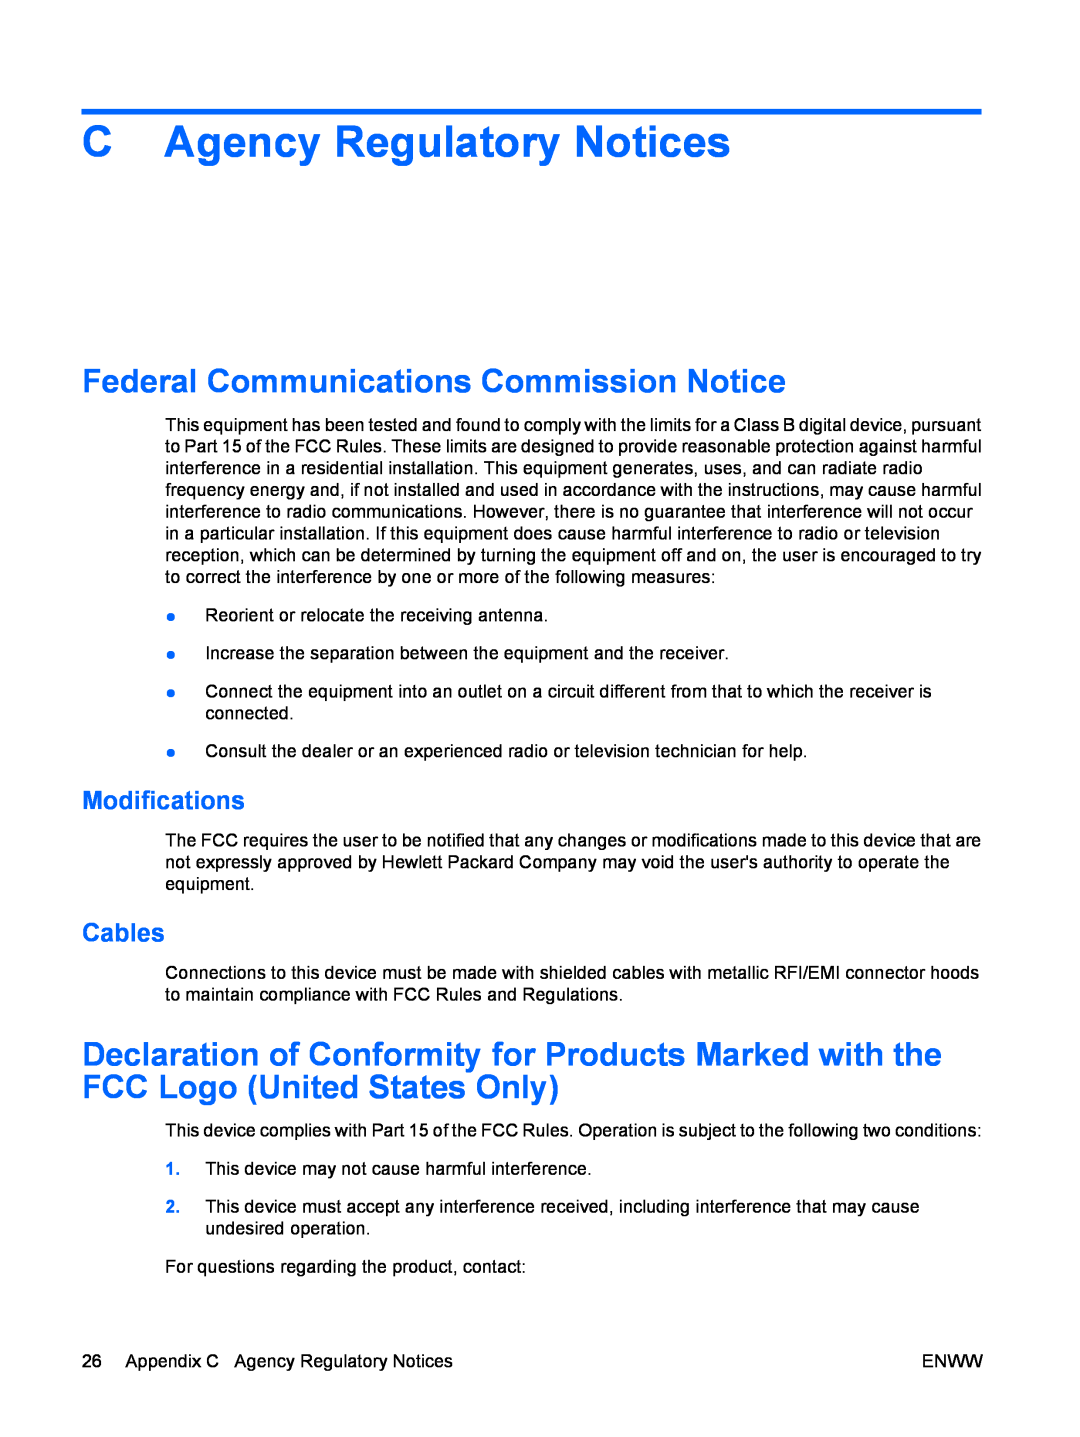 HP CQ1859E manual C Agency Regulatory Notices, Federal Communications Commission Notice, Modifications, Cables 